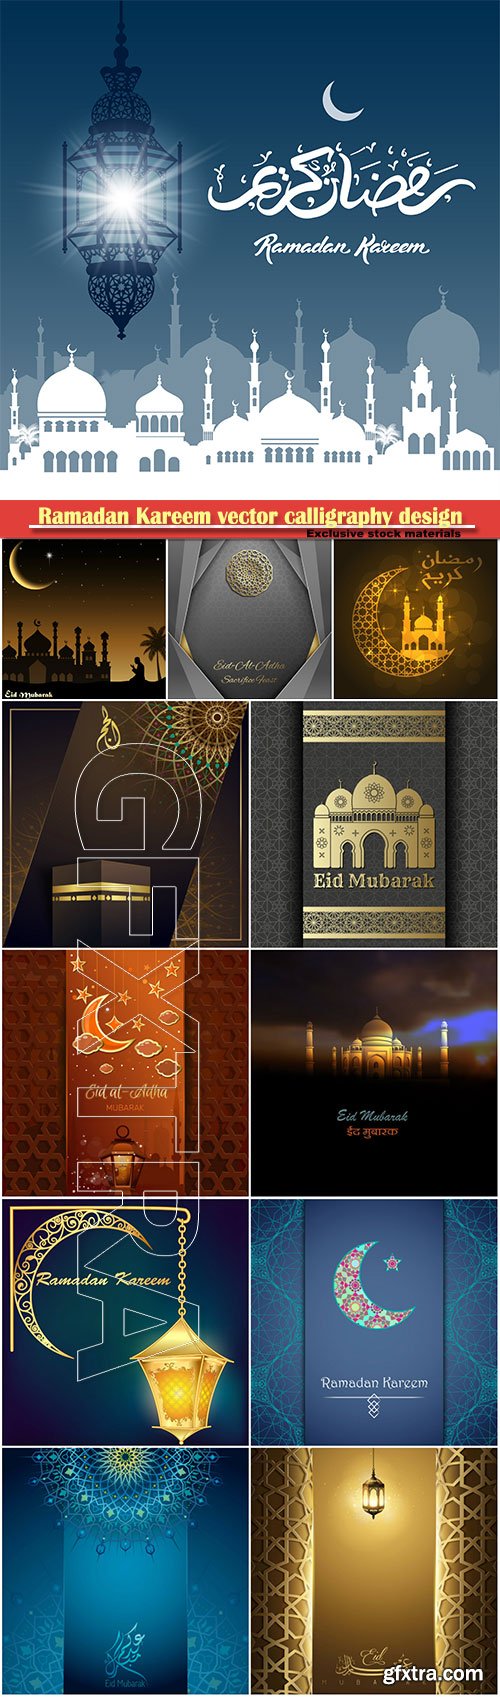 Ramadan Kareem vector calligraphy design with decorative floral pattern, mosque silhouette, crescent and glittering islamic background # 23